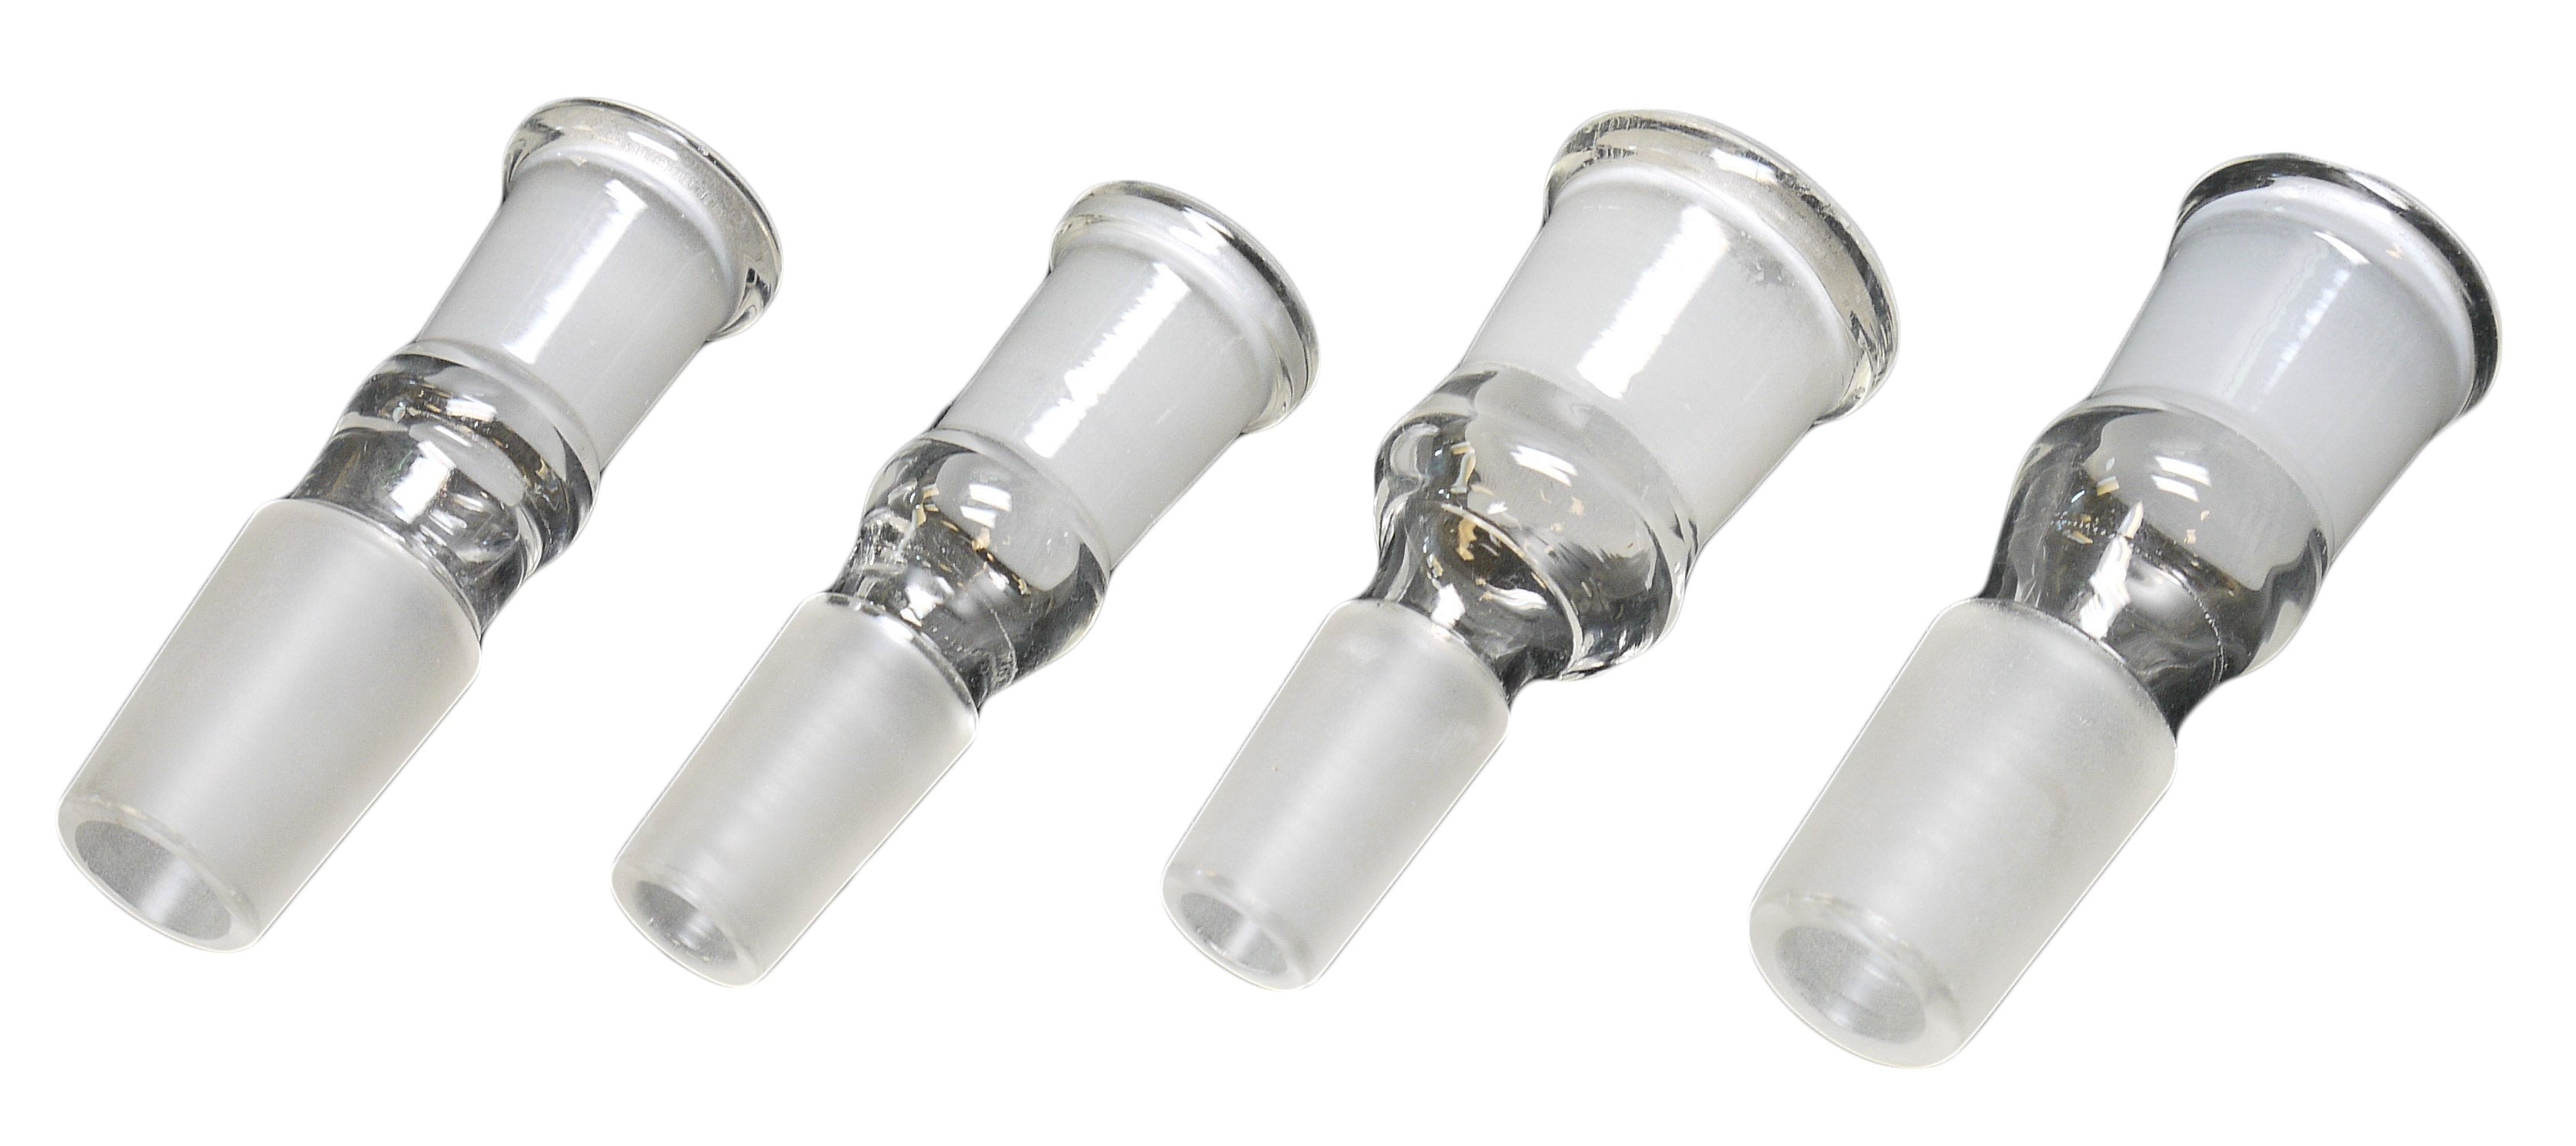 Male to Male connector 14mm to 19mm